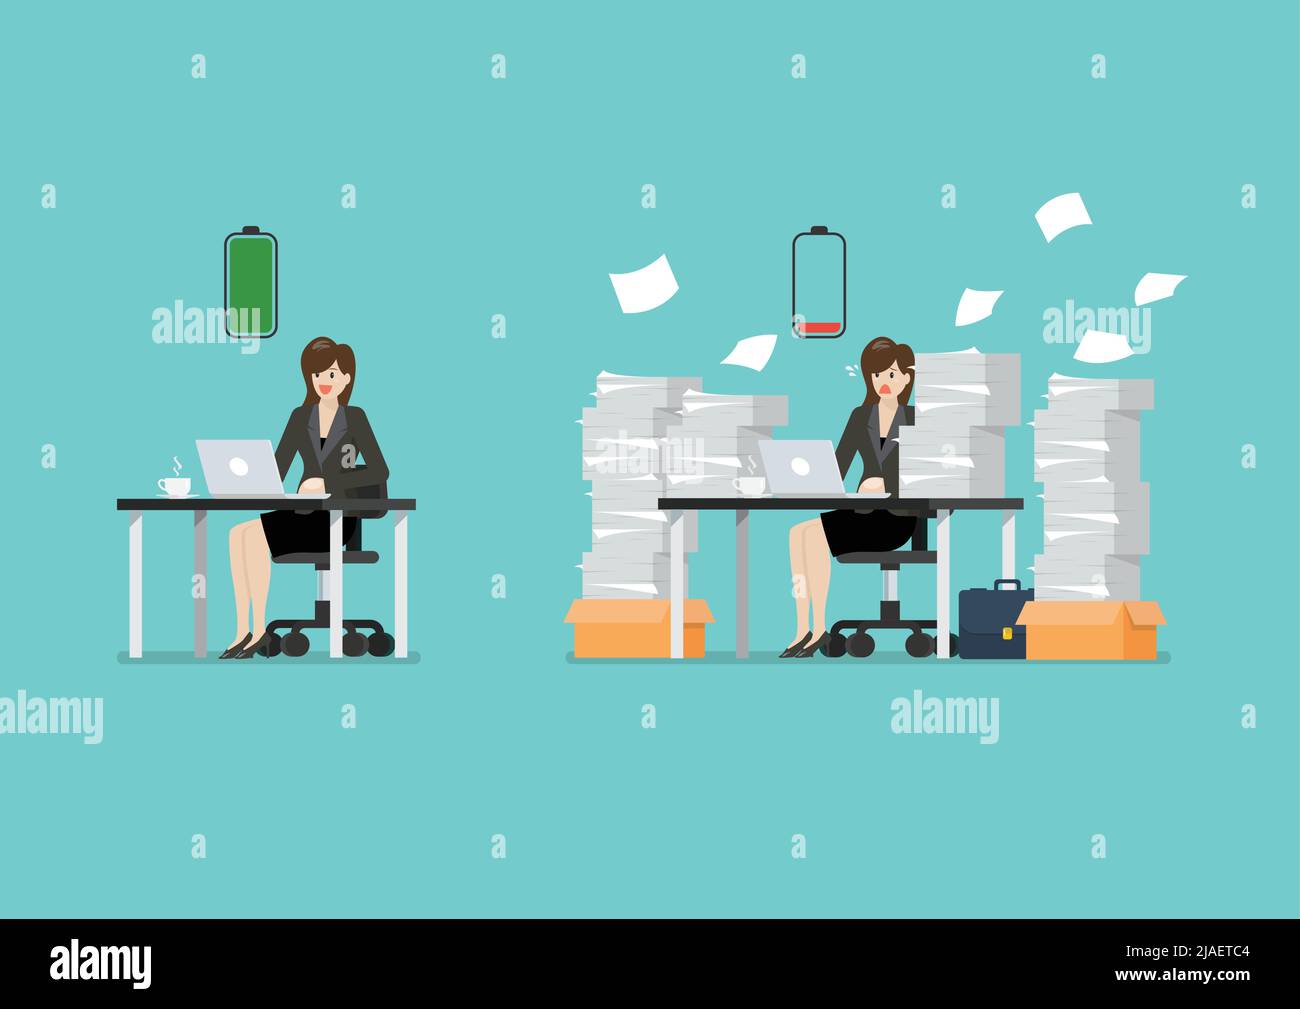 Full battery woman and low battery woman sitting at table with laptop and pile of papers. Vector illustration Stock Vector